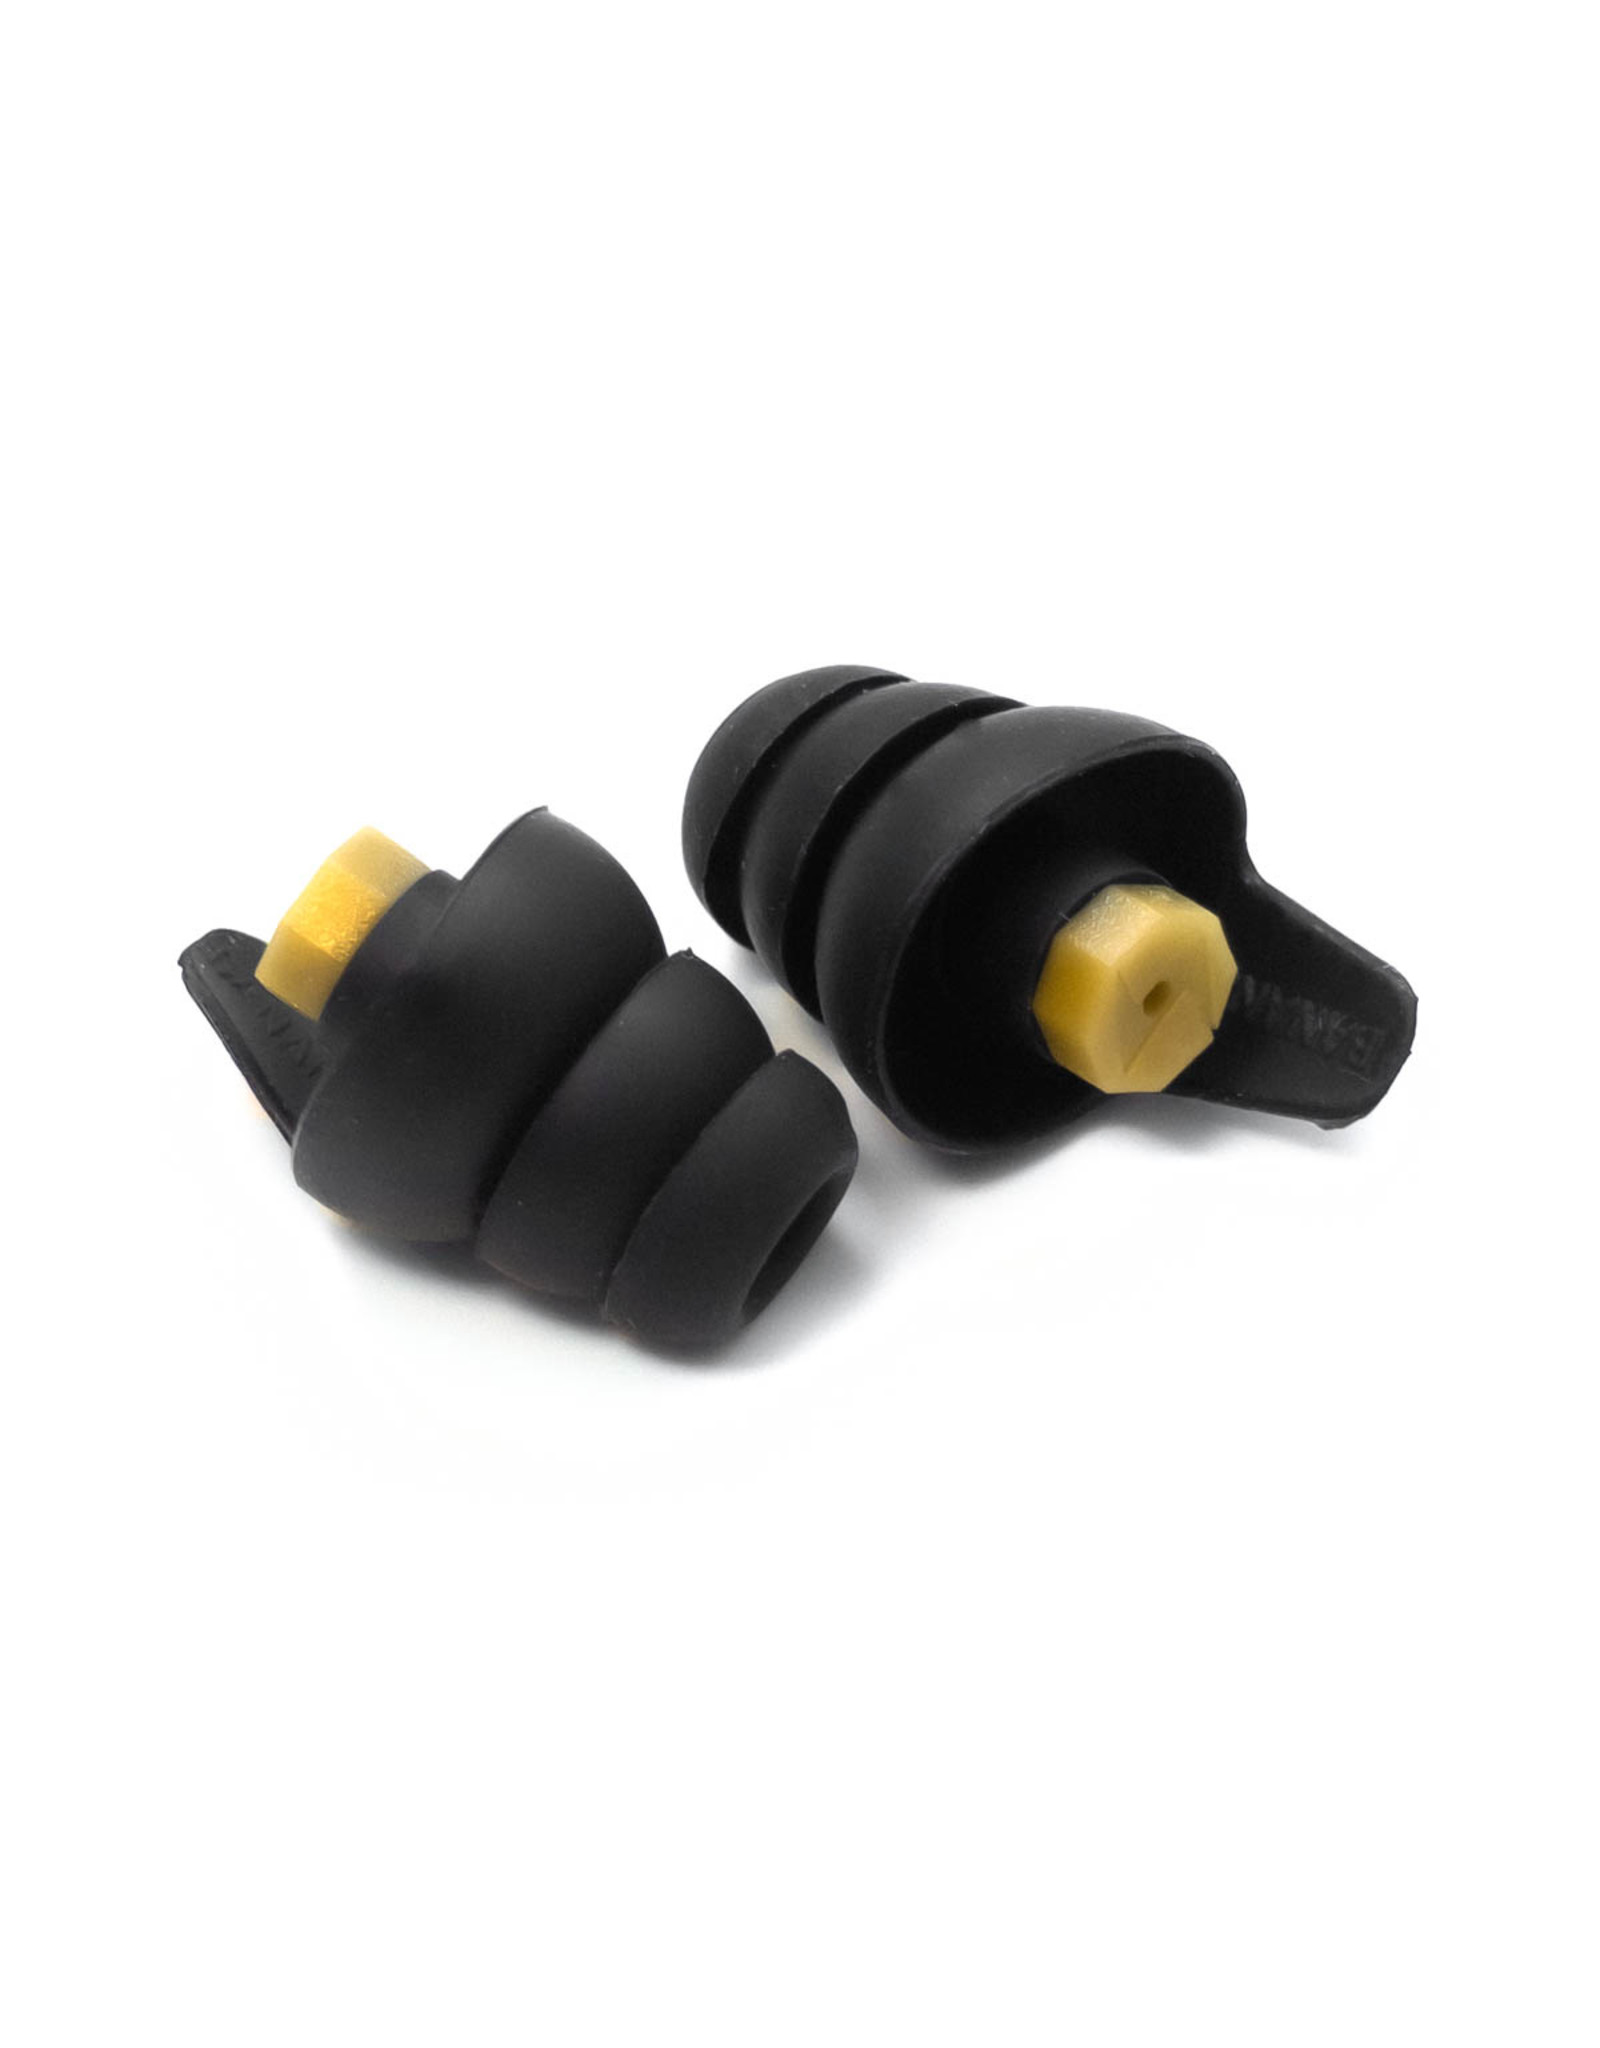 Thunderplugs Earplugs with filter | Protect your ears against loud music and noises